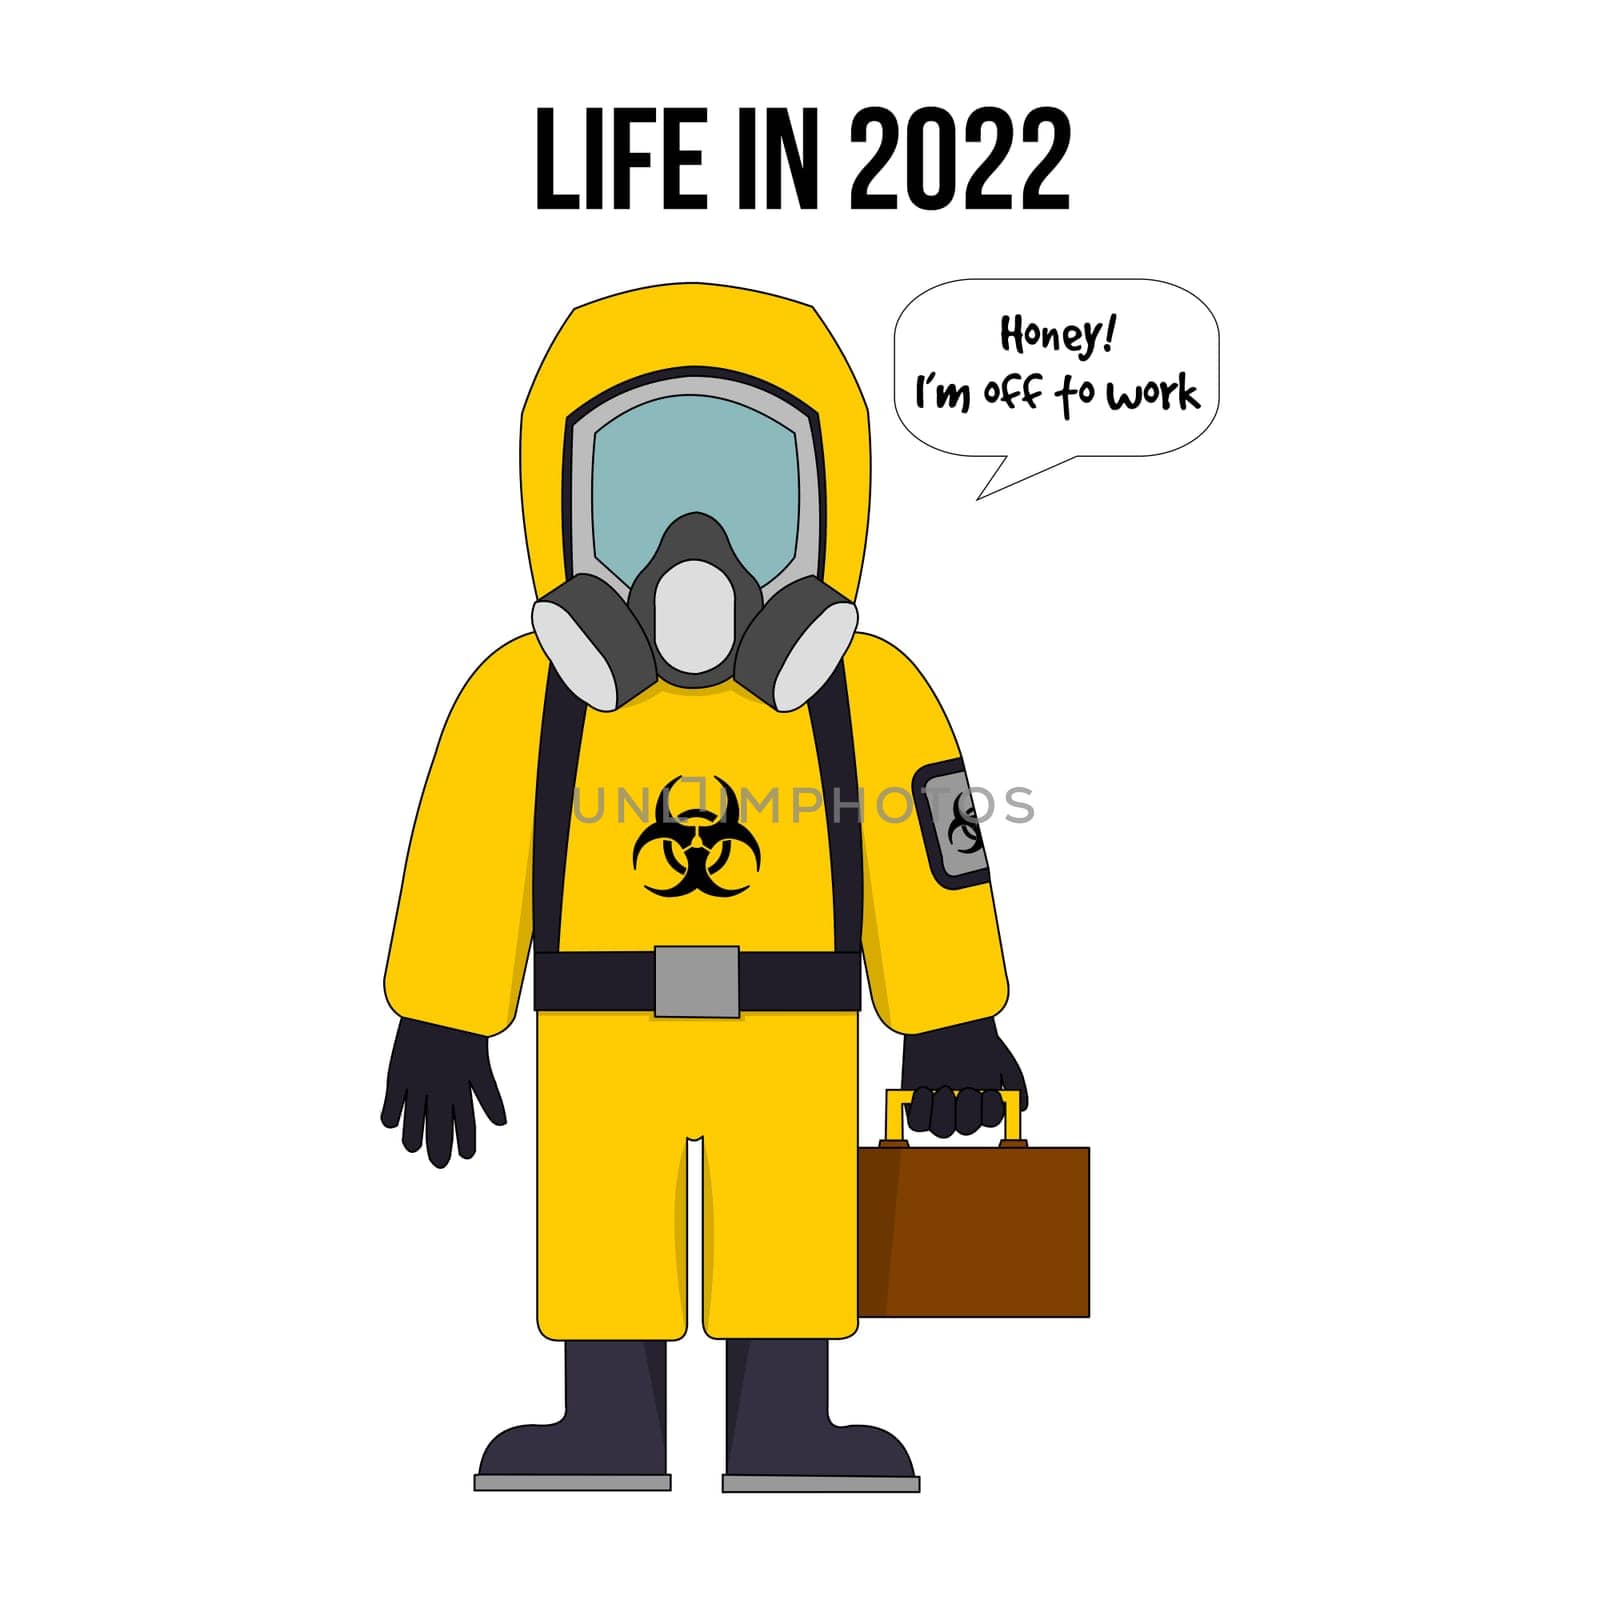 A person holding a suitcase going to work wearing a hazard suit with the text "life in 2022".